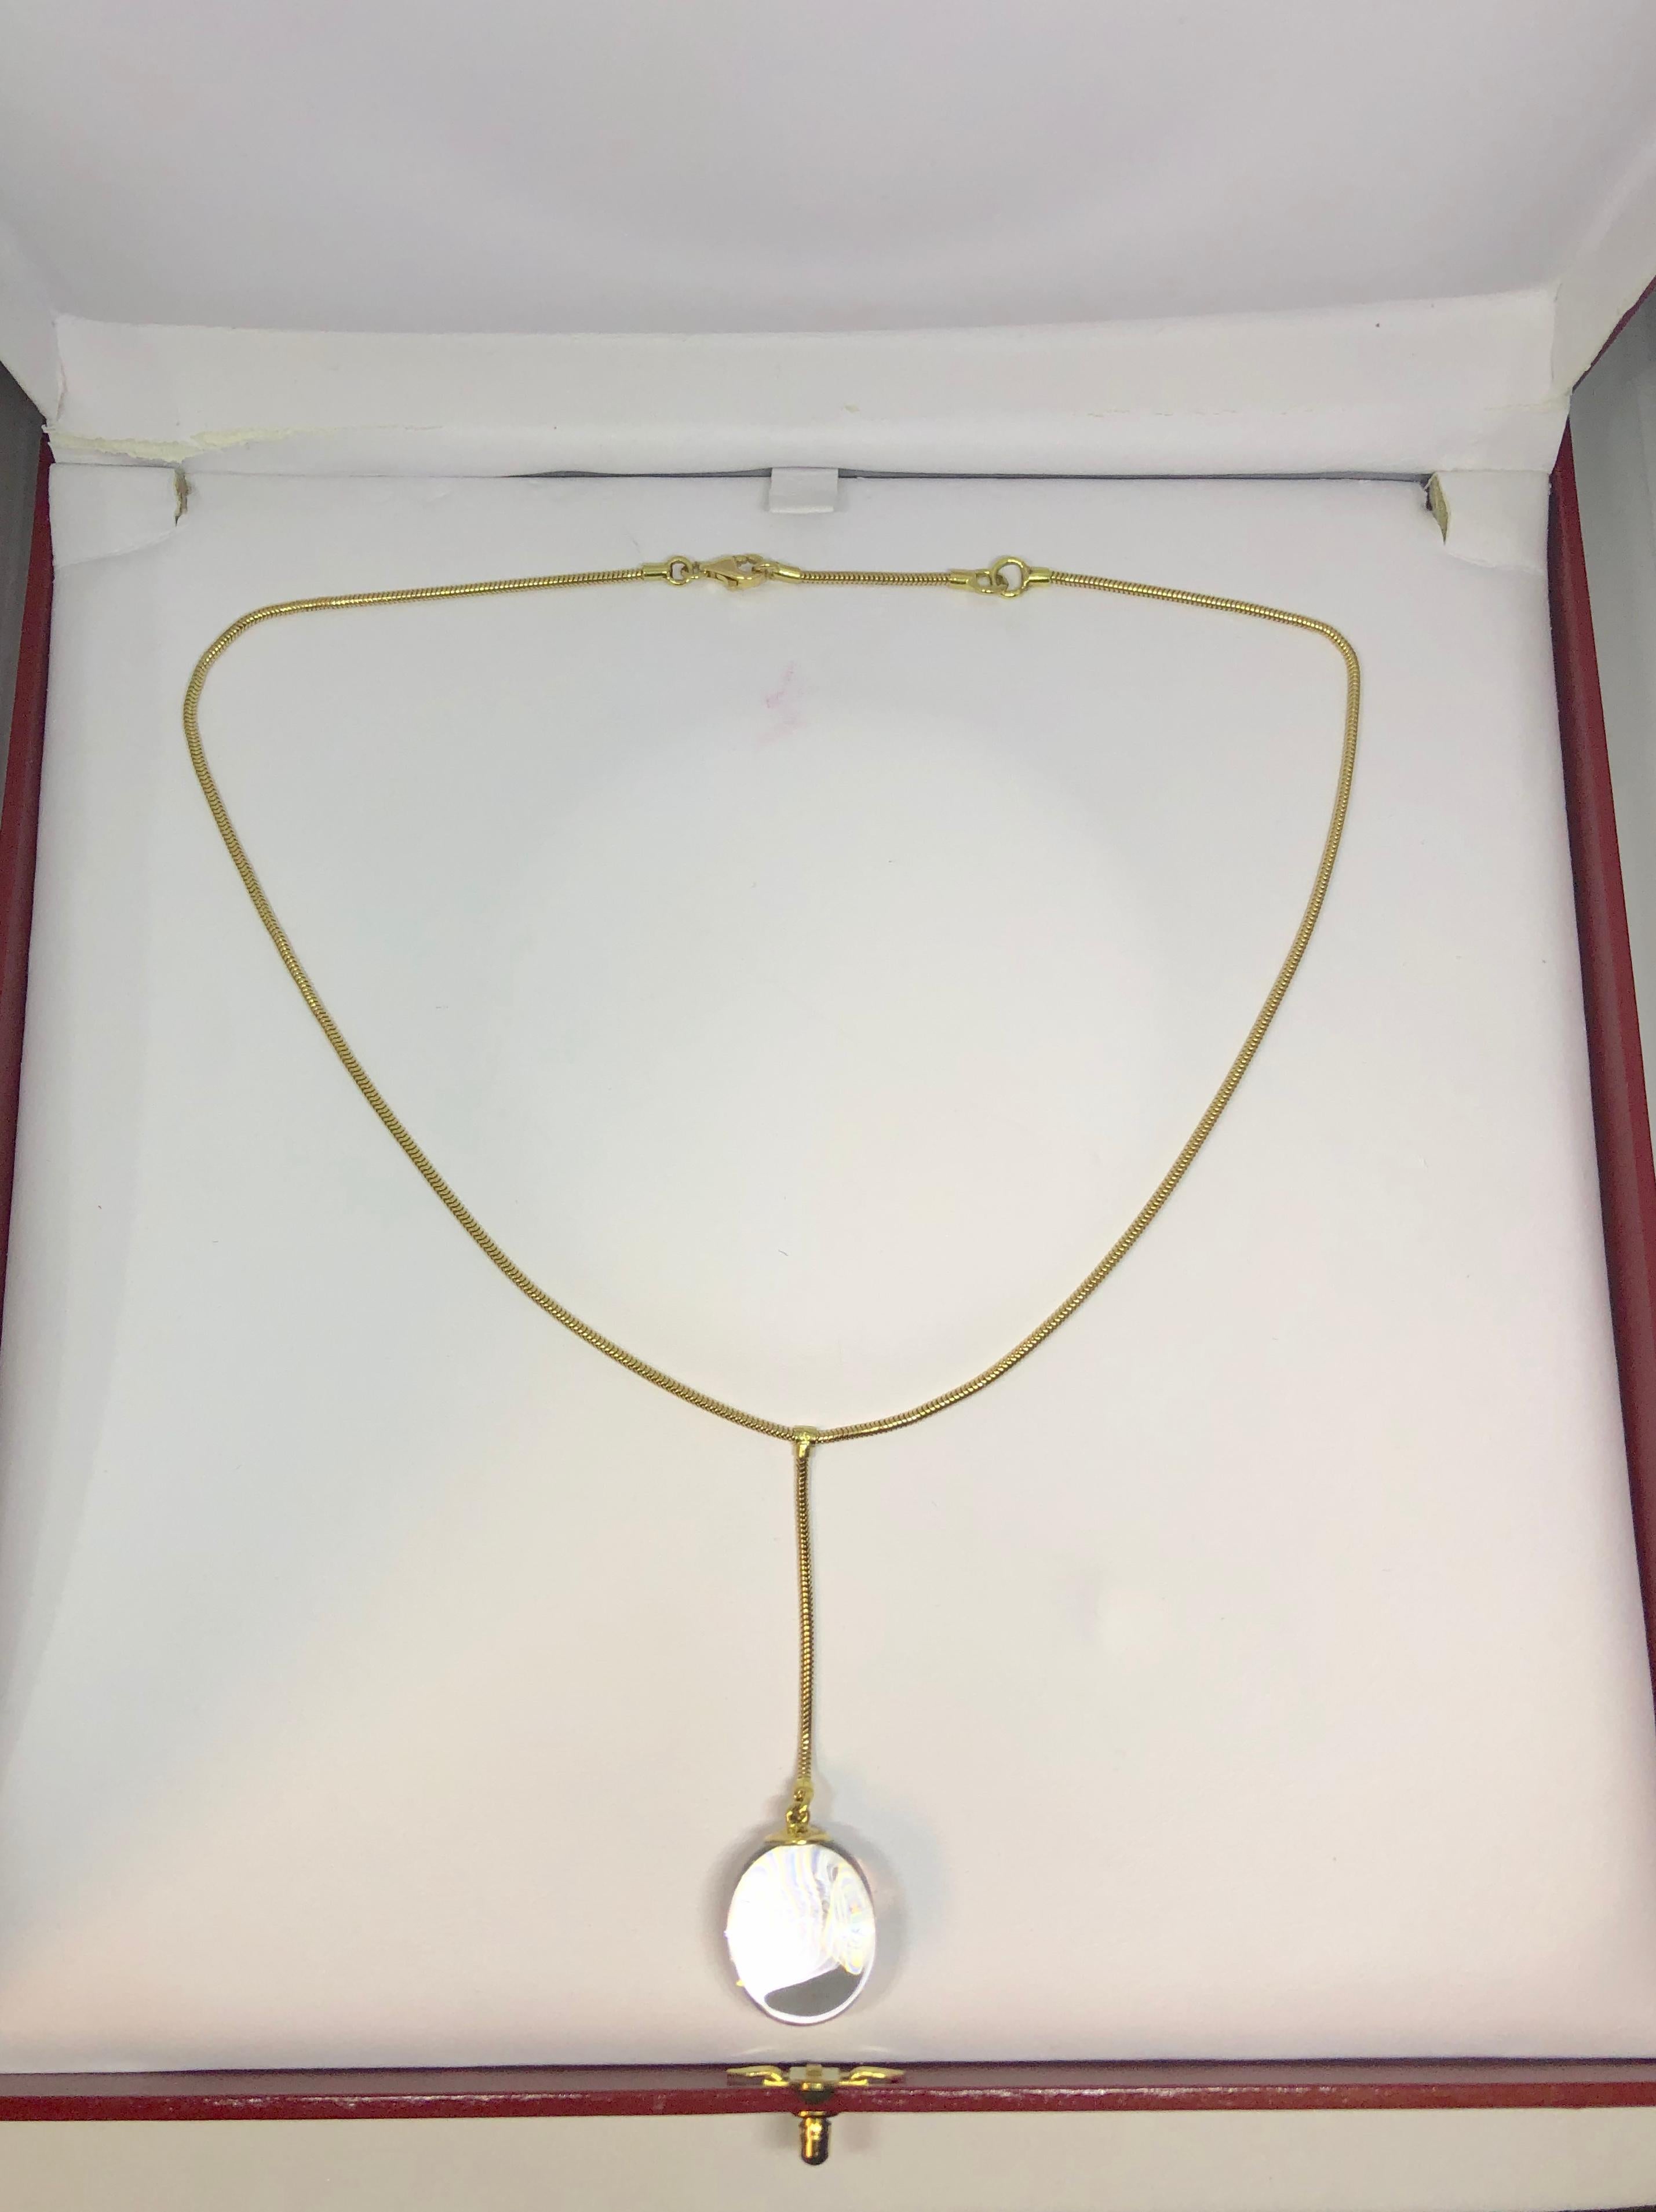 Baccarat 18 karat crystal modern 1990's  lariat necklace. This original Baccarat piece is created in 18 karat yellow gold, weight = 12.7 grams, 8.1 dwt. Of course this piece is adorned with the most desirable French Baccarat crystal, the crystal